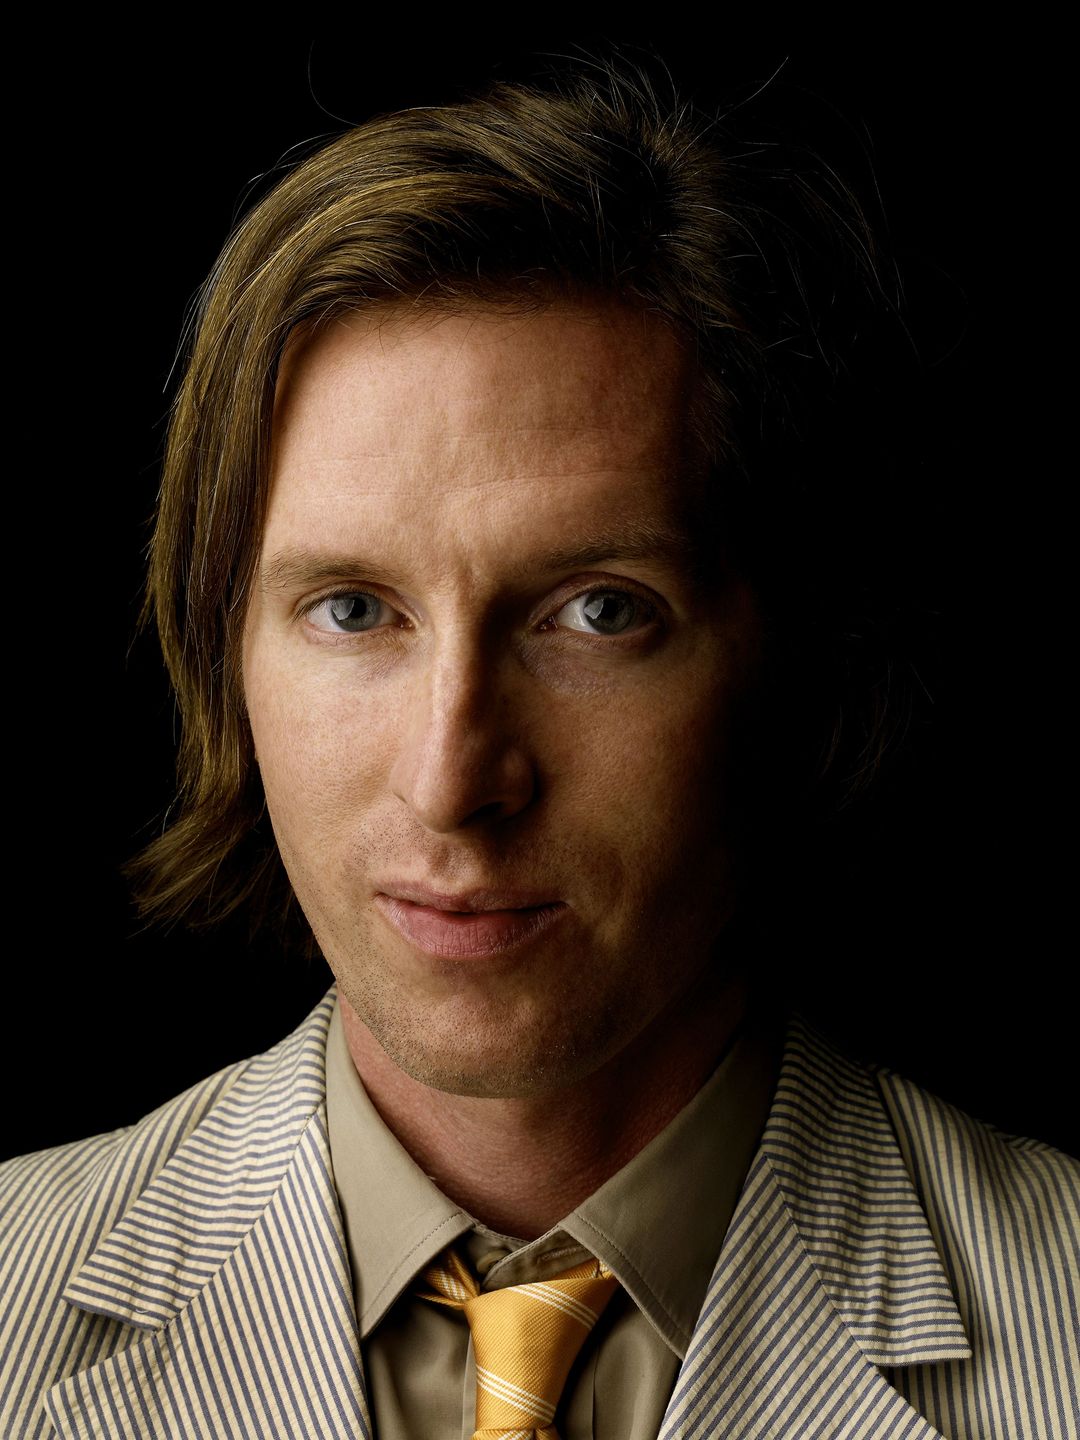 Wes Anderson who is he